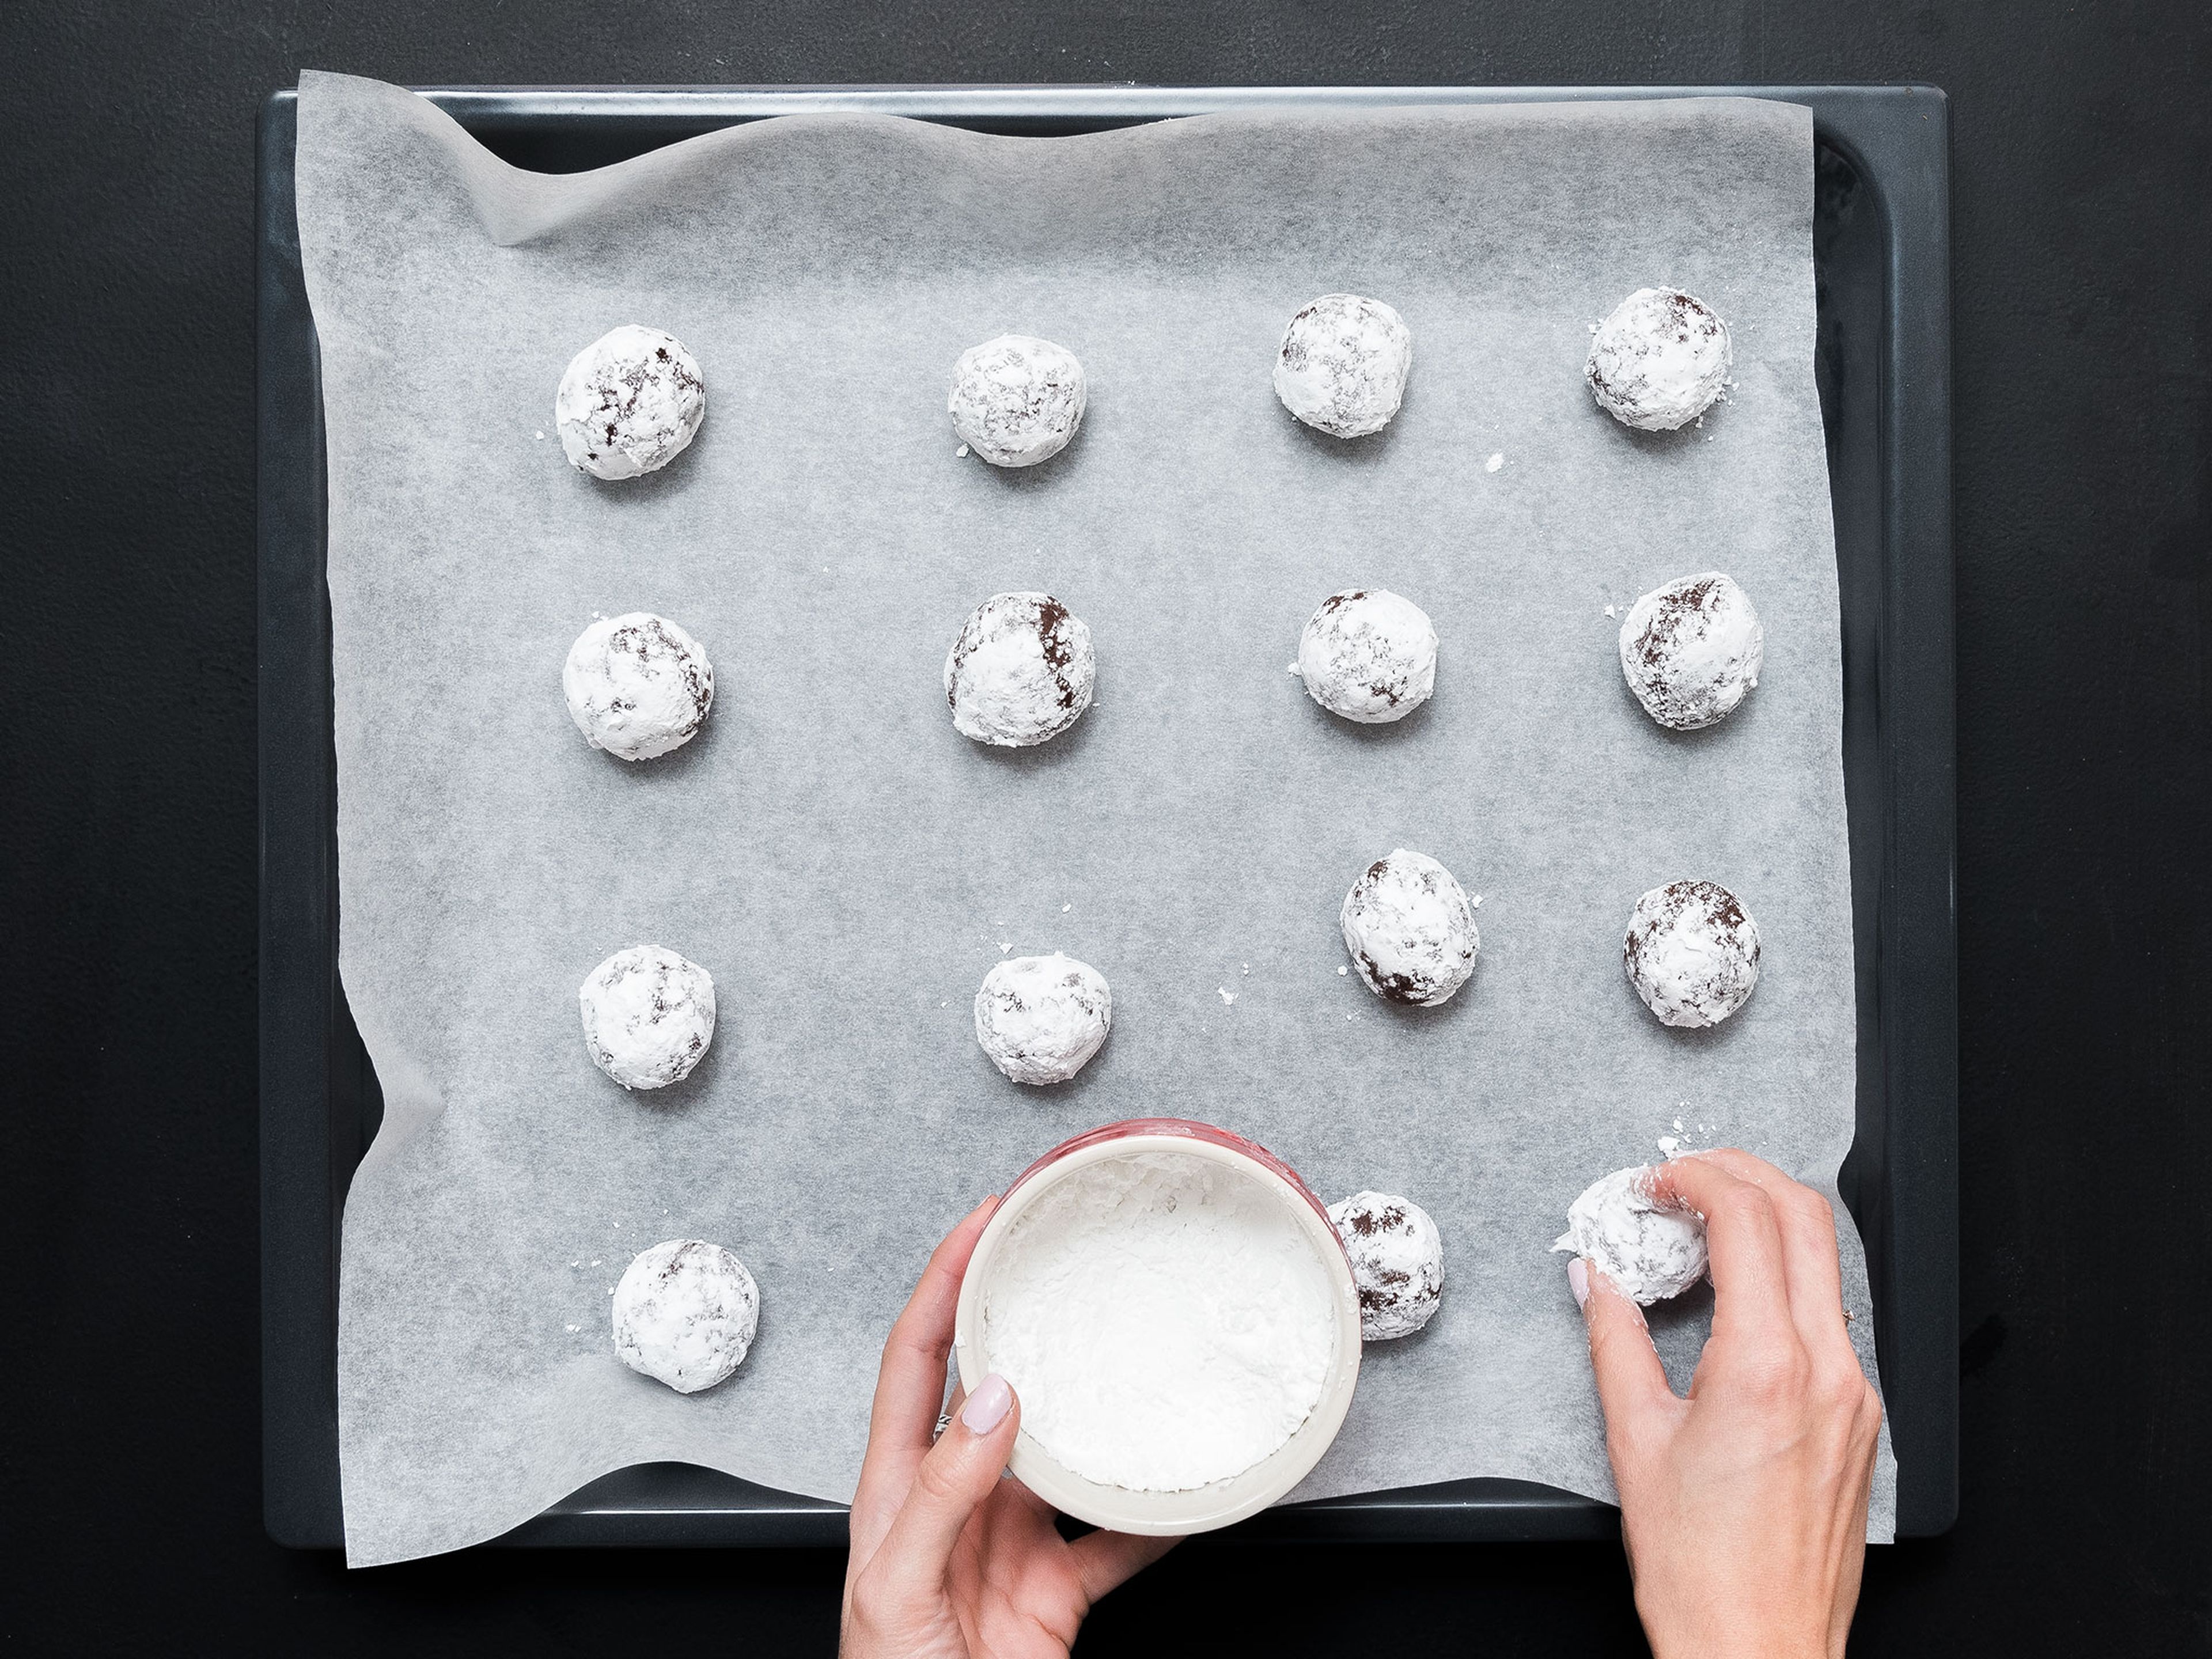 Preheat oven to 180°C/ 350°F. Form the dough into walnut-sized balls and roll them in confectioner's sugar. Place them on a baking sheet lined with parchment paper with approx. 3-cm/1.2-inch space in between and bake for approx. 12 min. Enjoy!